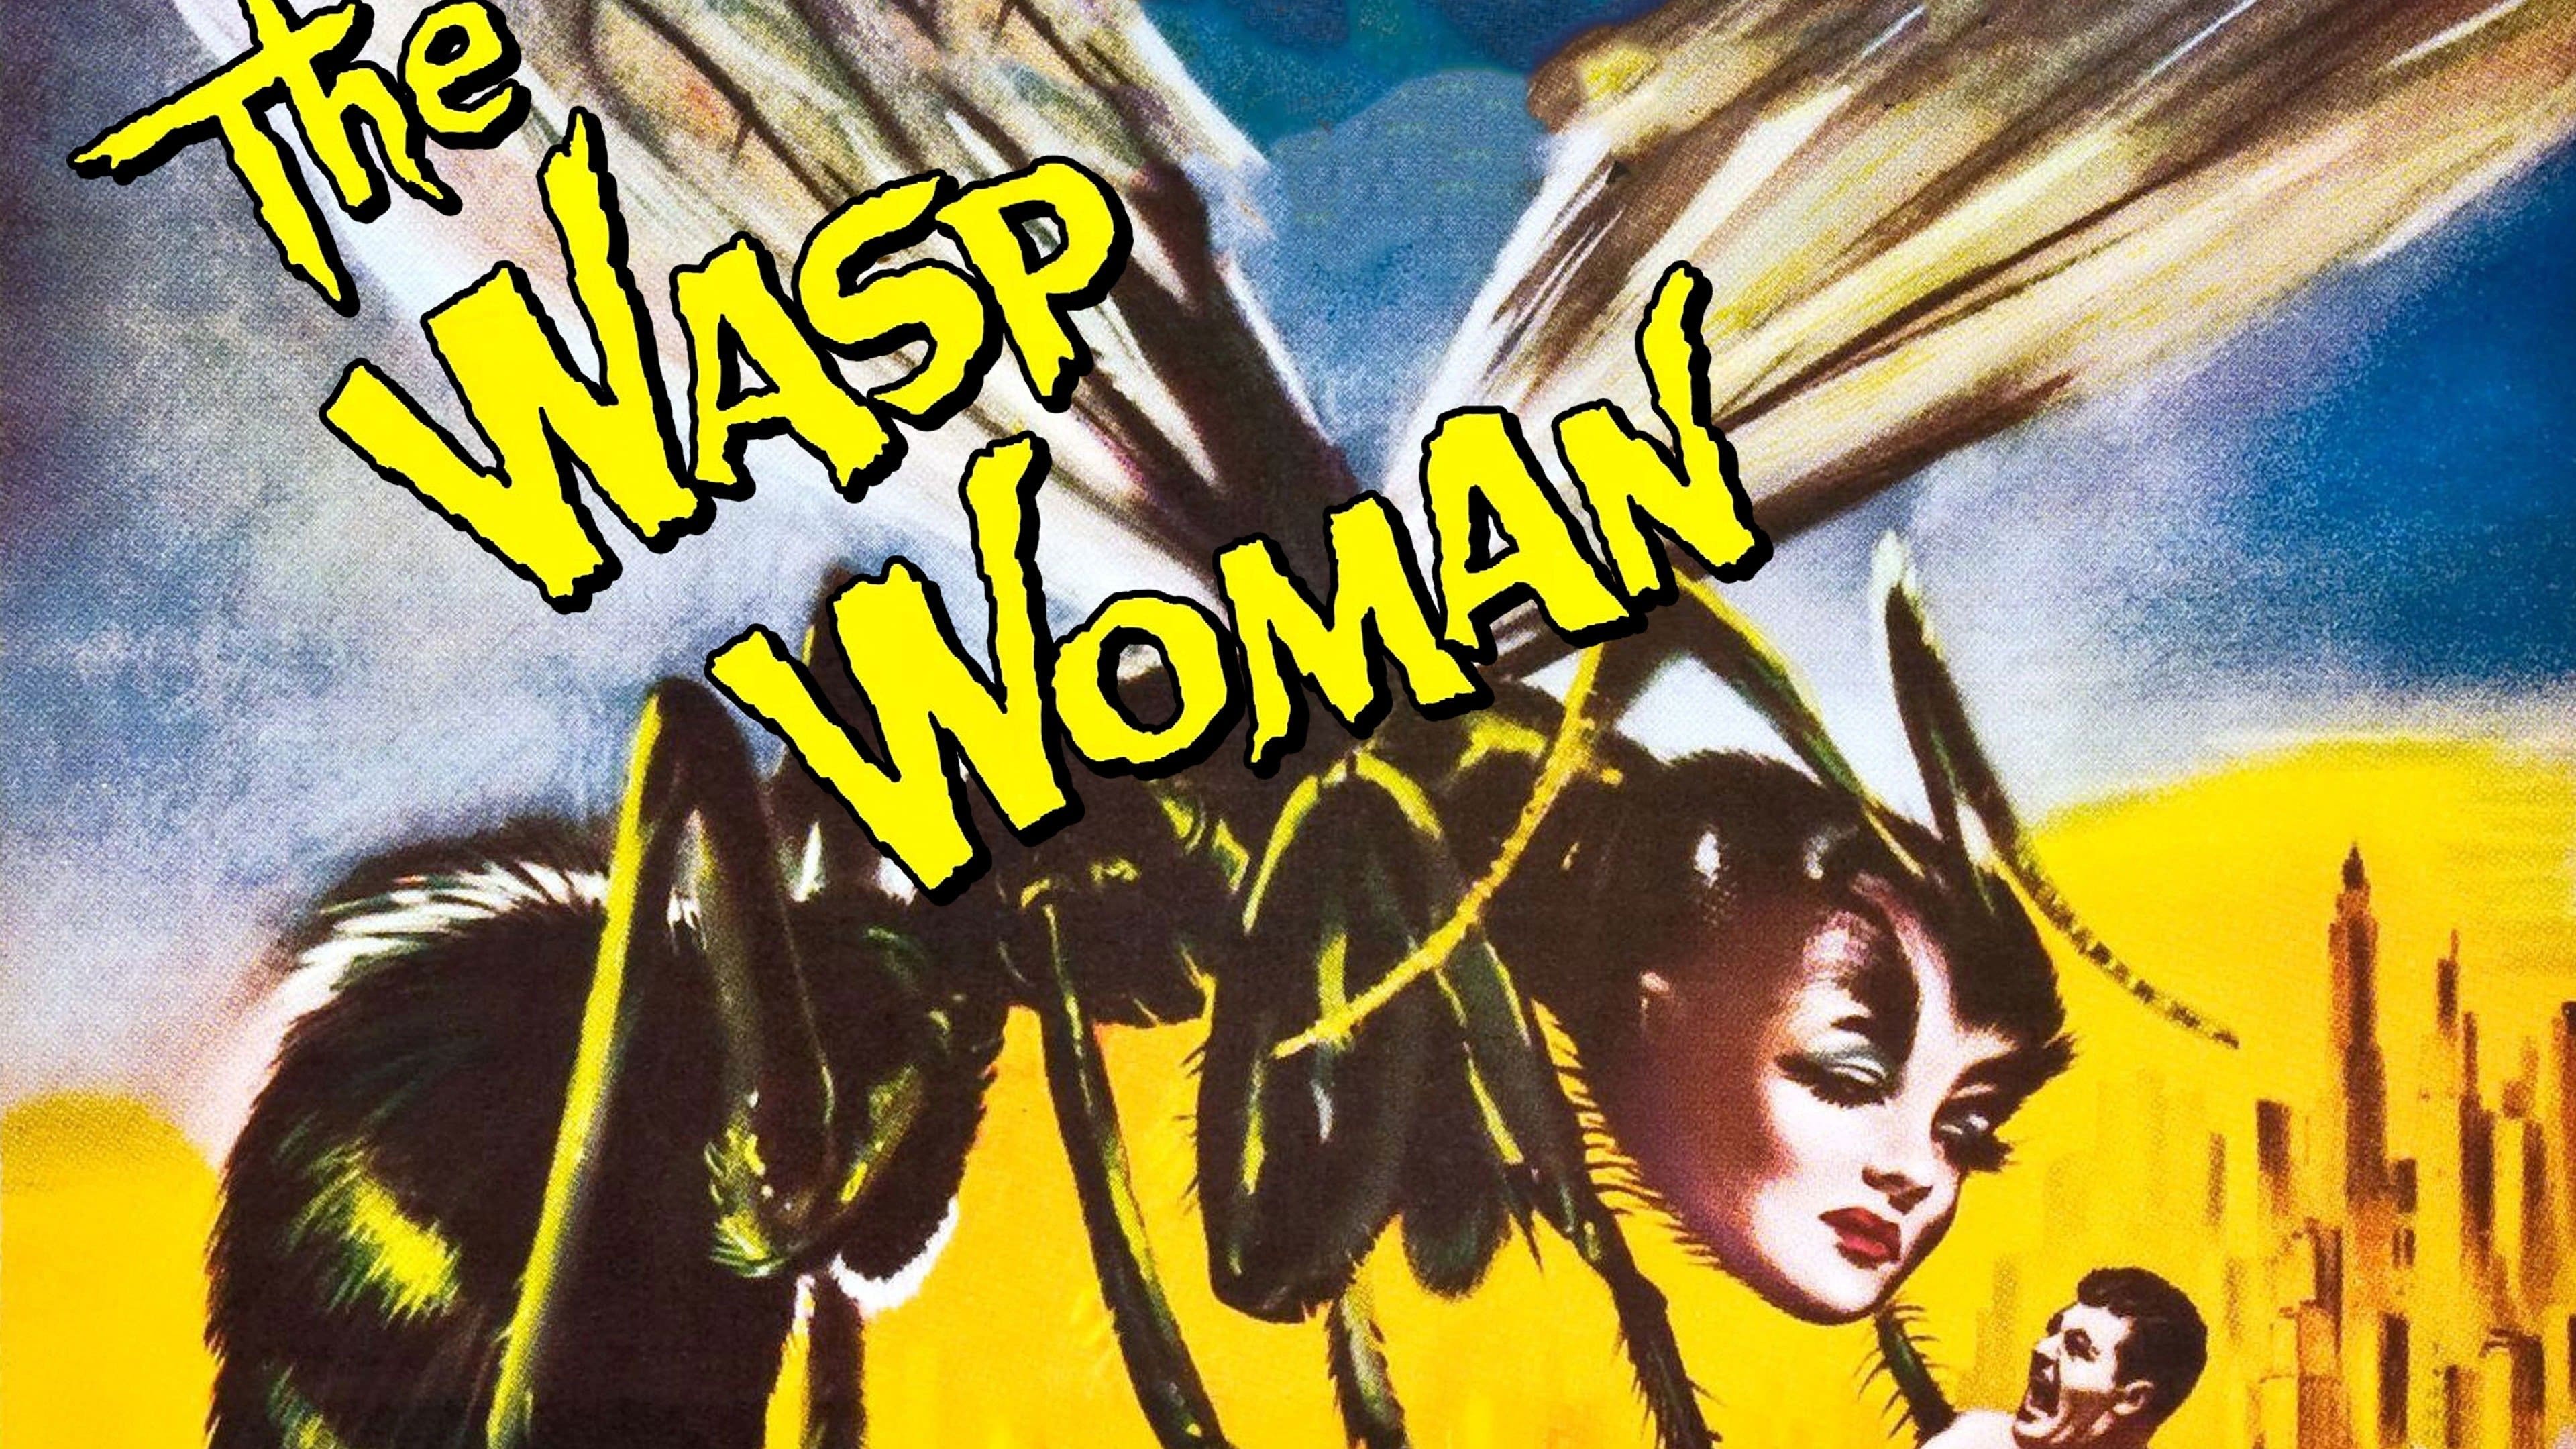 The Wasp Woman (1959)